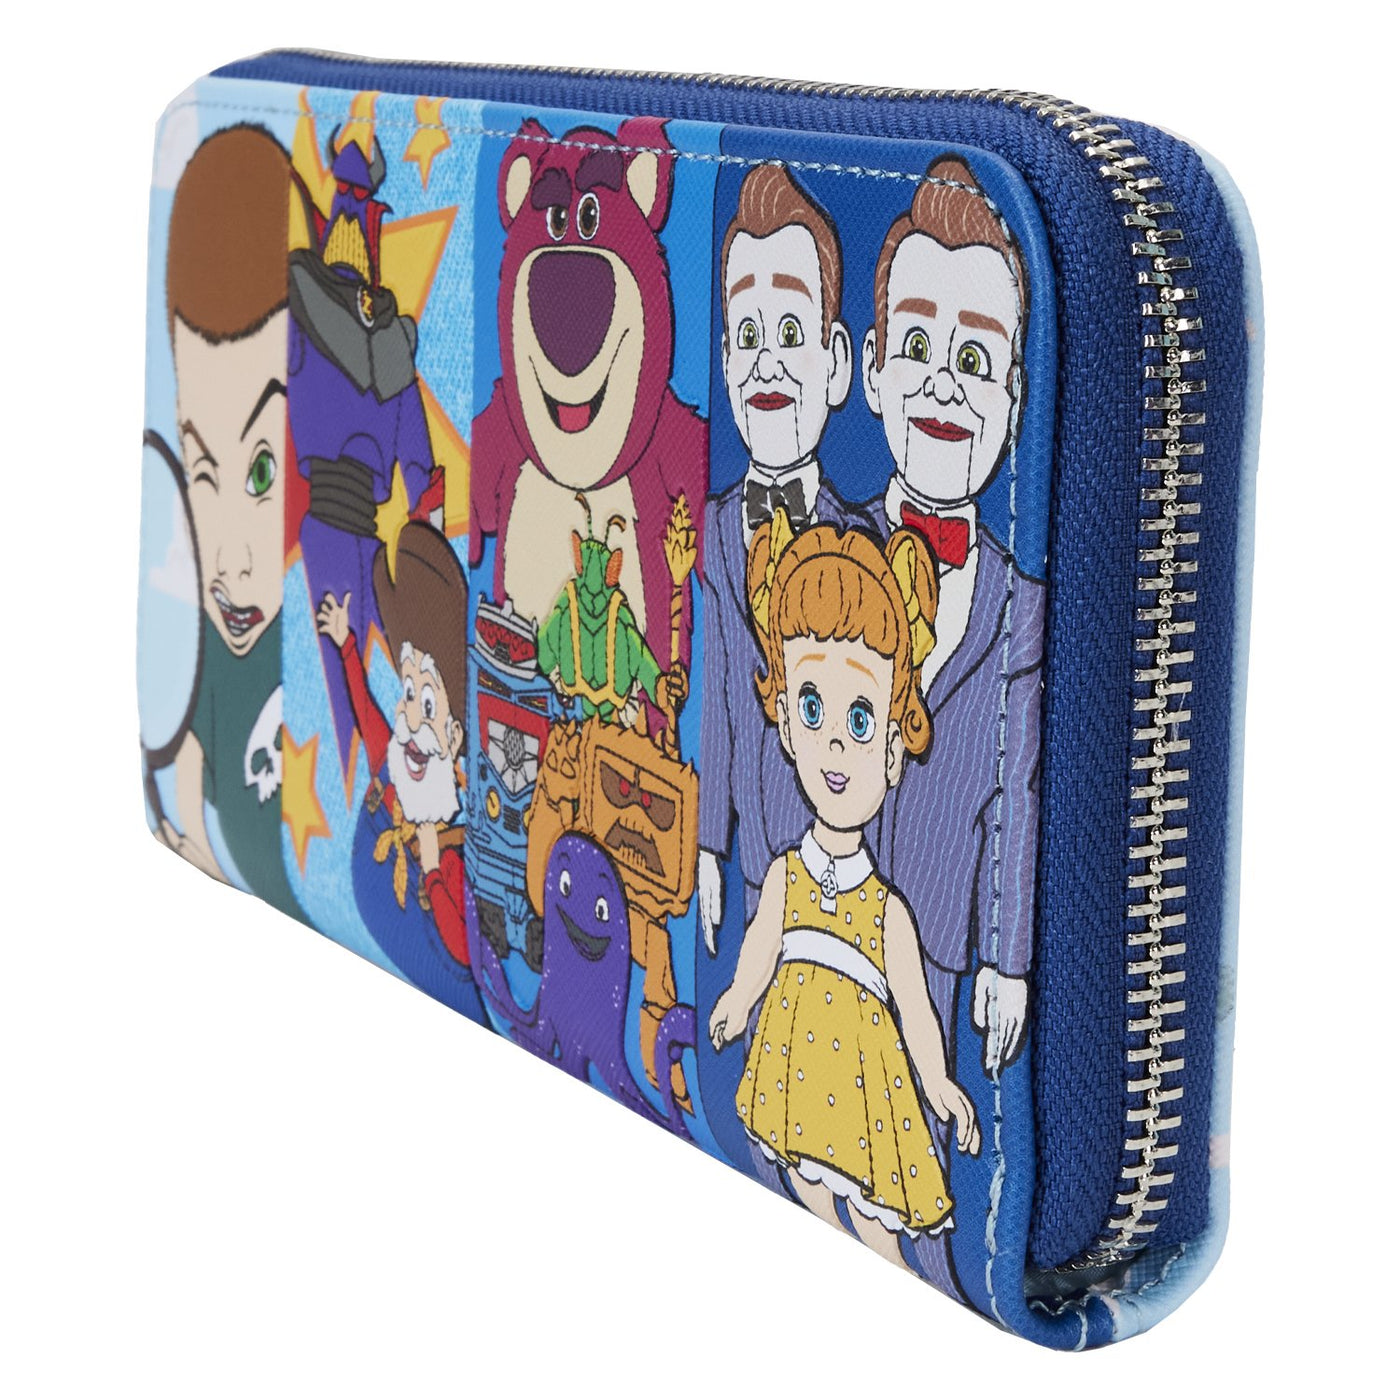 Loungefly Pixar Toy Story Villains Zip-Around Wristlet Wallet - Side View